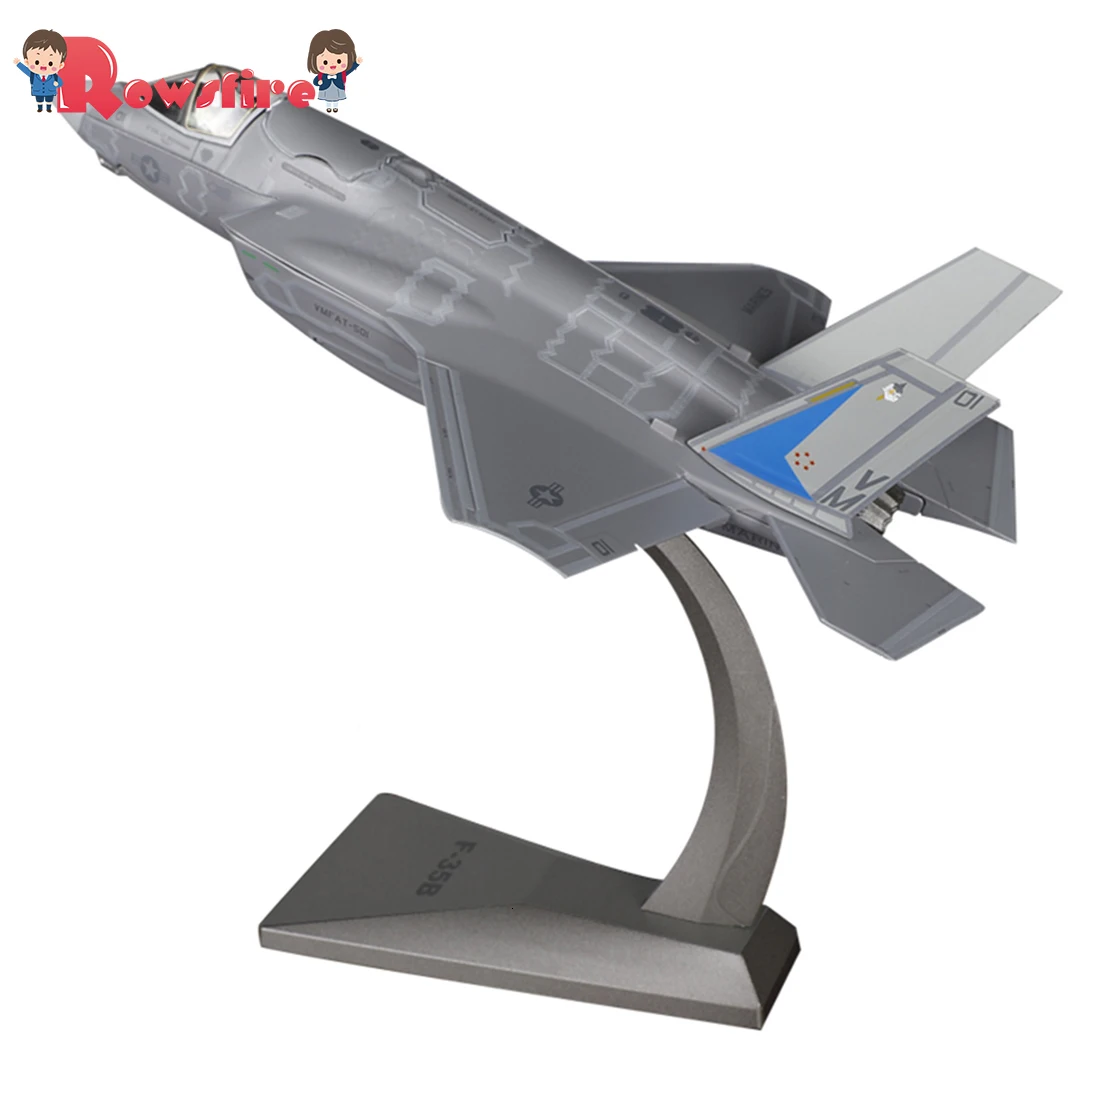 

Rowsfire 1:72 F35b Alloy Carrier Model Military Simulation Lightning Model Airplane Gift Toy Ornament for Office Decor